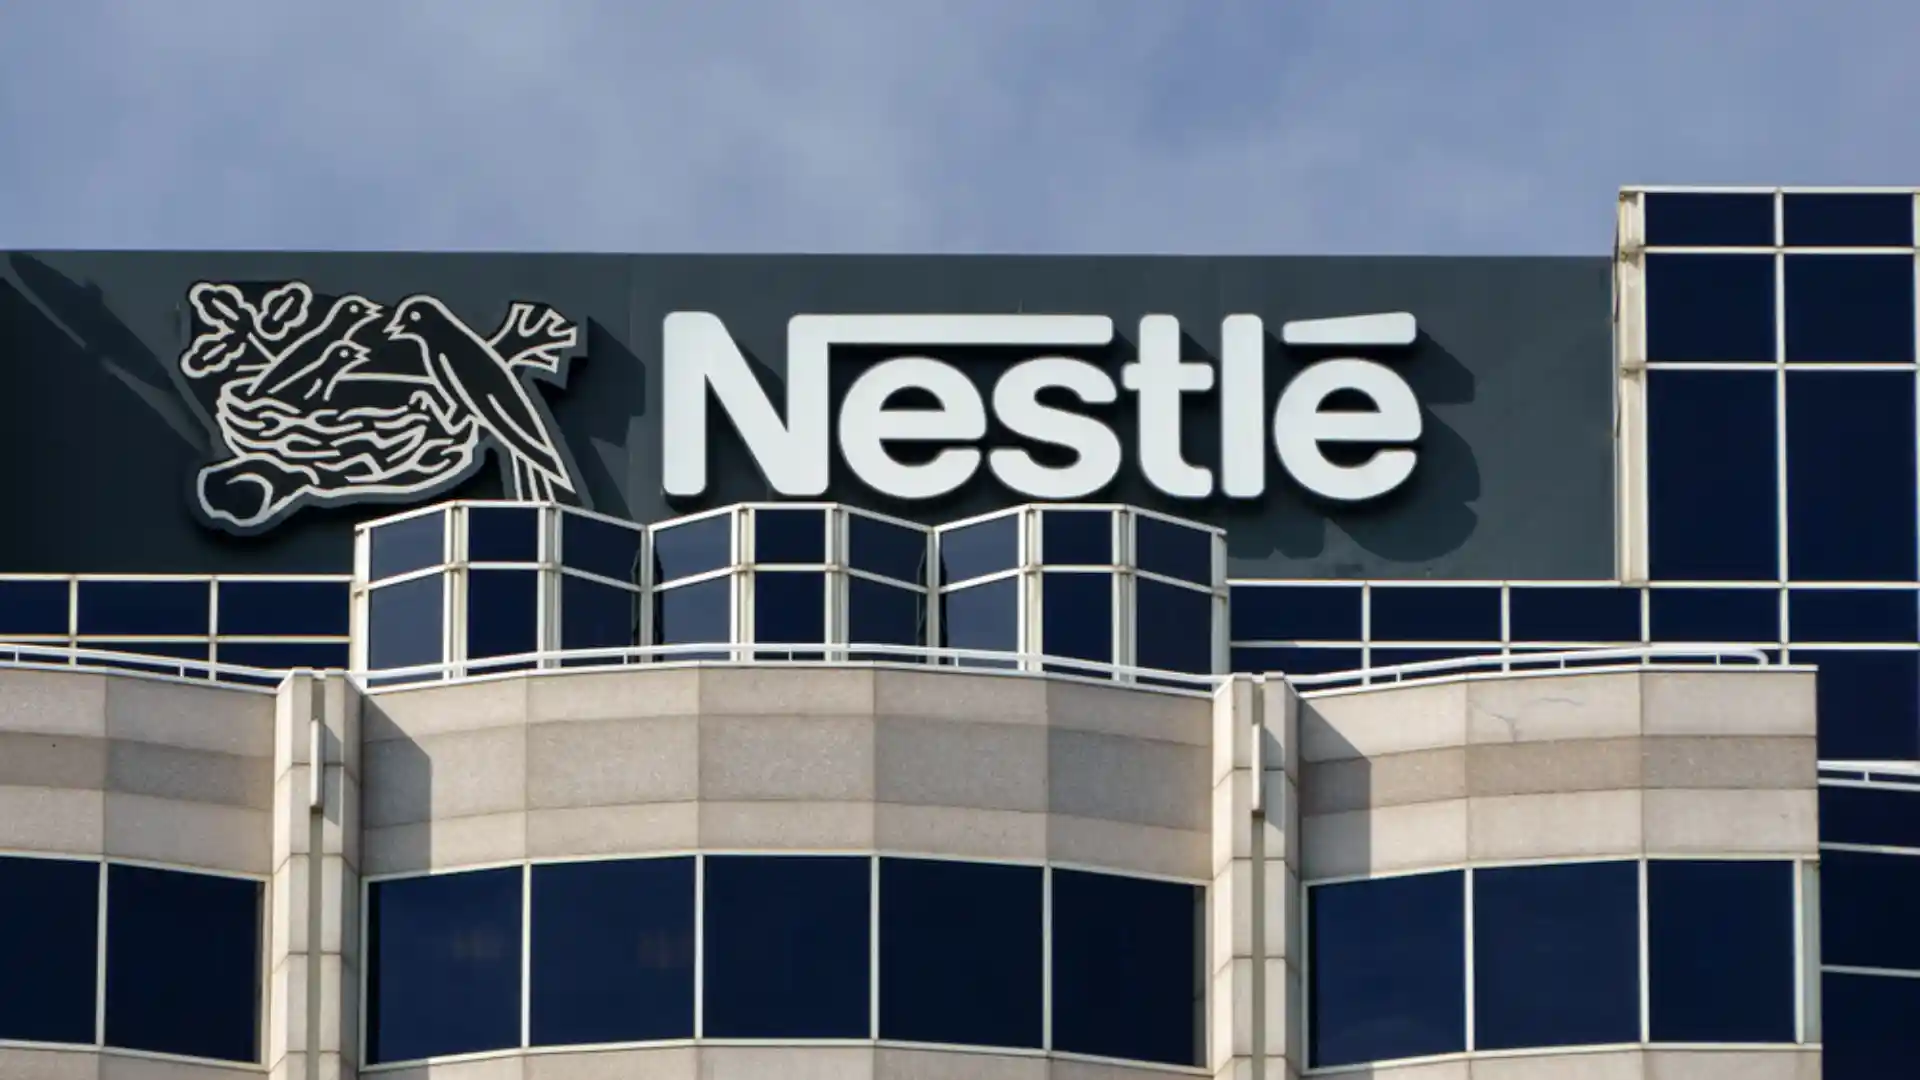 Nestlé Under Fire for Sugar Addition in Infant Products Sold in Developing Nations